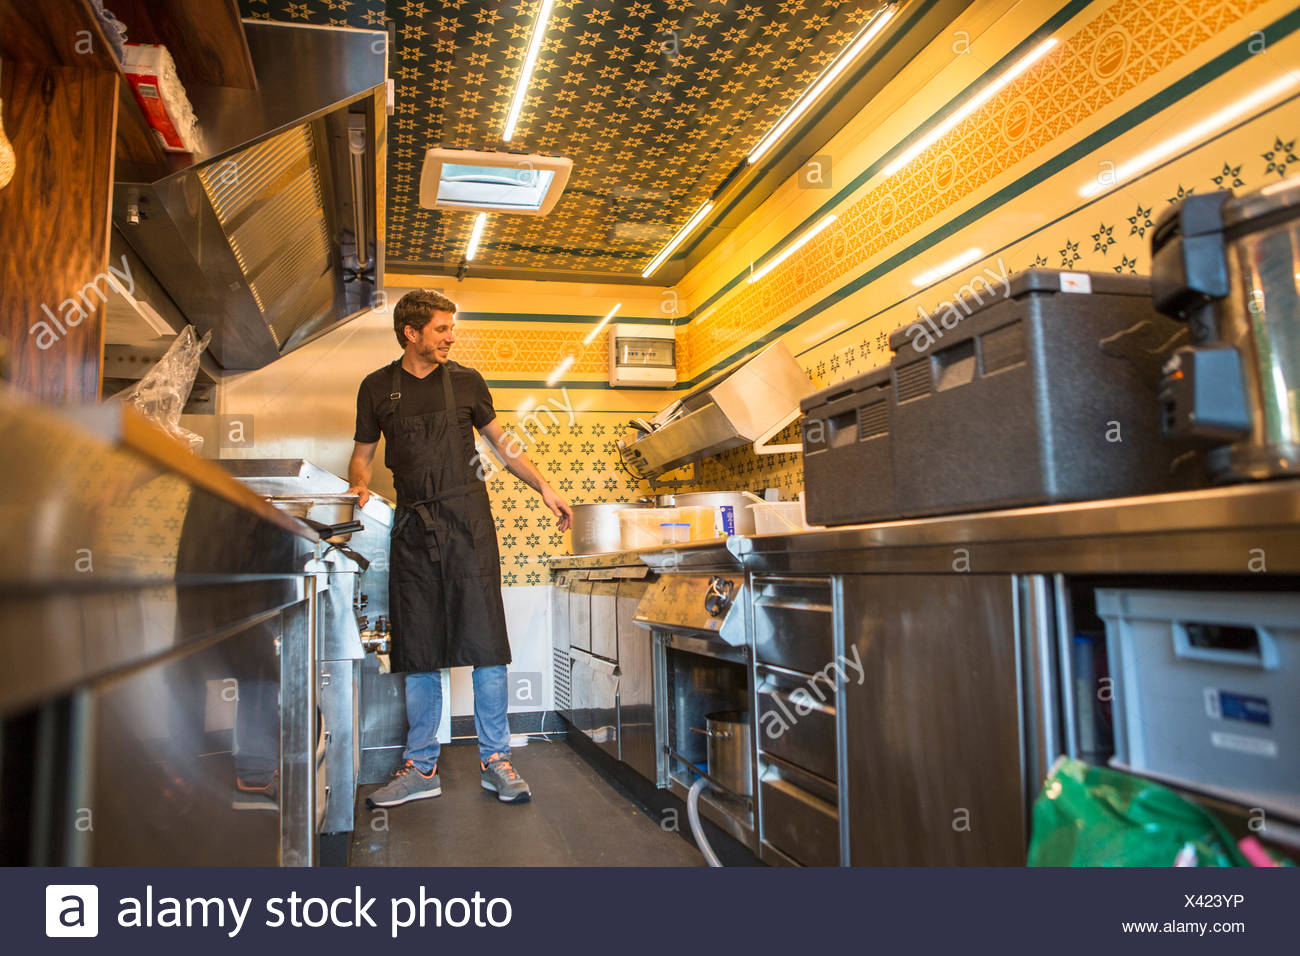 Entrepreneur With Apron Working In Commercial Kitchen At